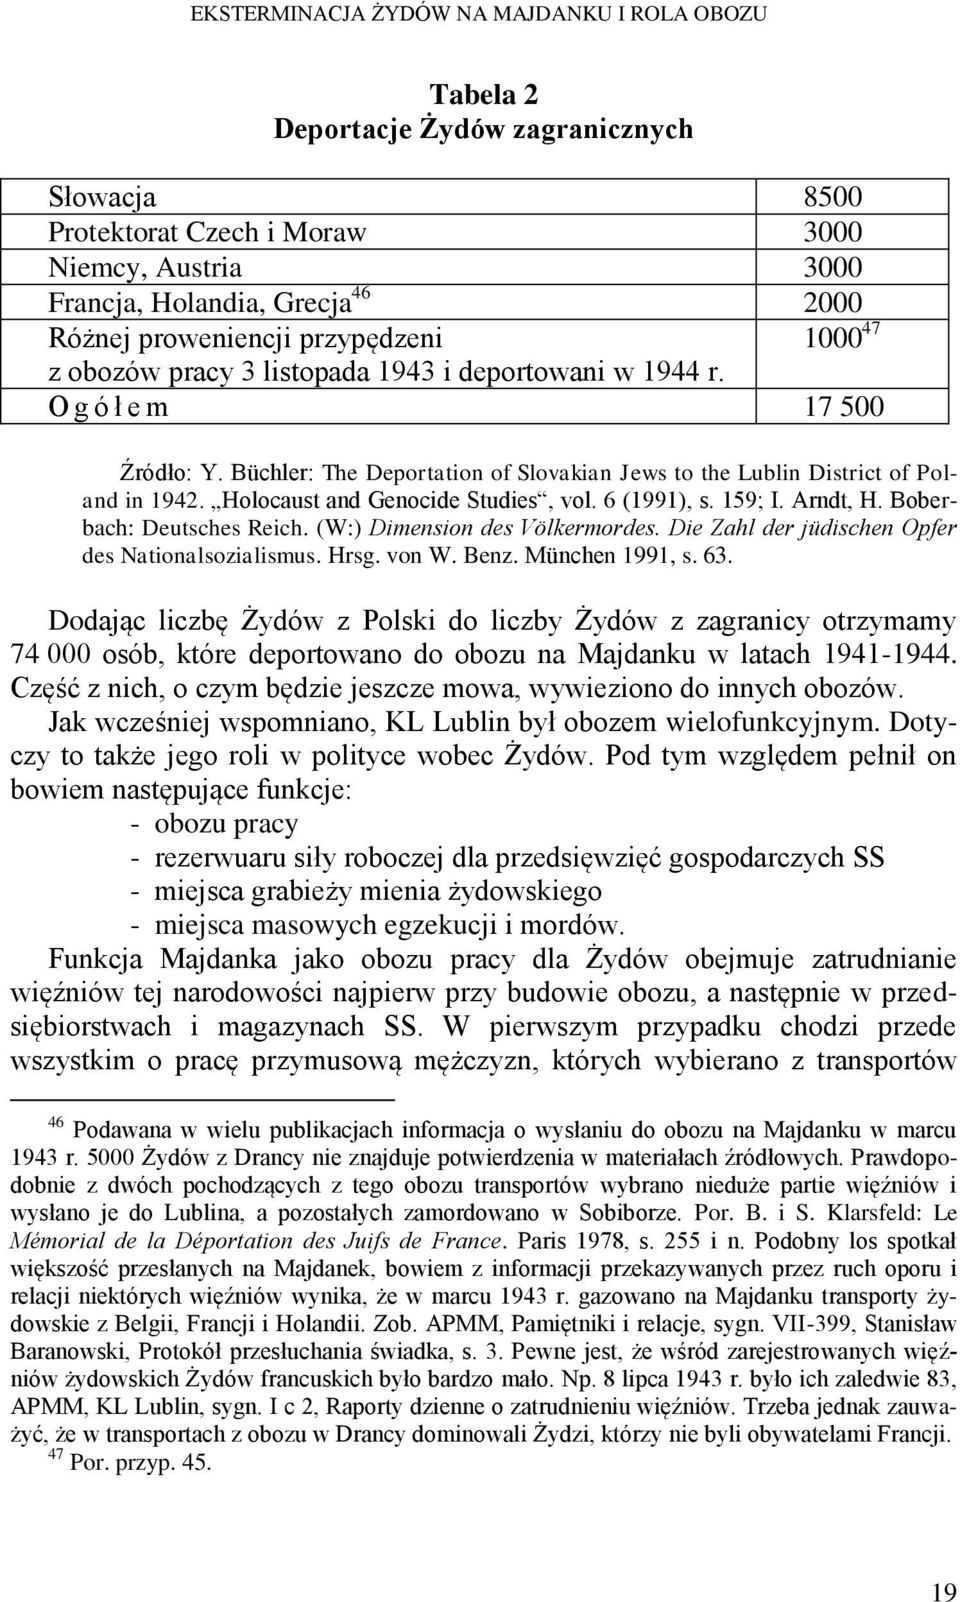 Büchler: The Deportation of Slovakian Jews to the Lublin District of Poland in 1942. Holocaust and Genocide Studies, vol. 6 (1991), s. 159; I. Arndt, H. Boberbach: Deutsches Reich.